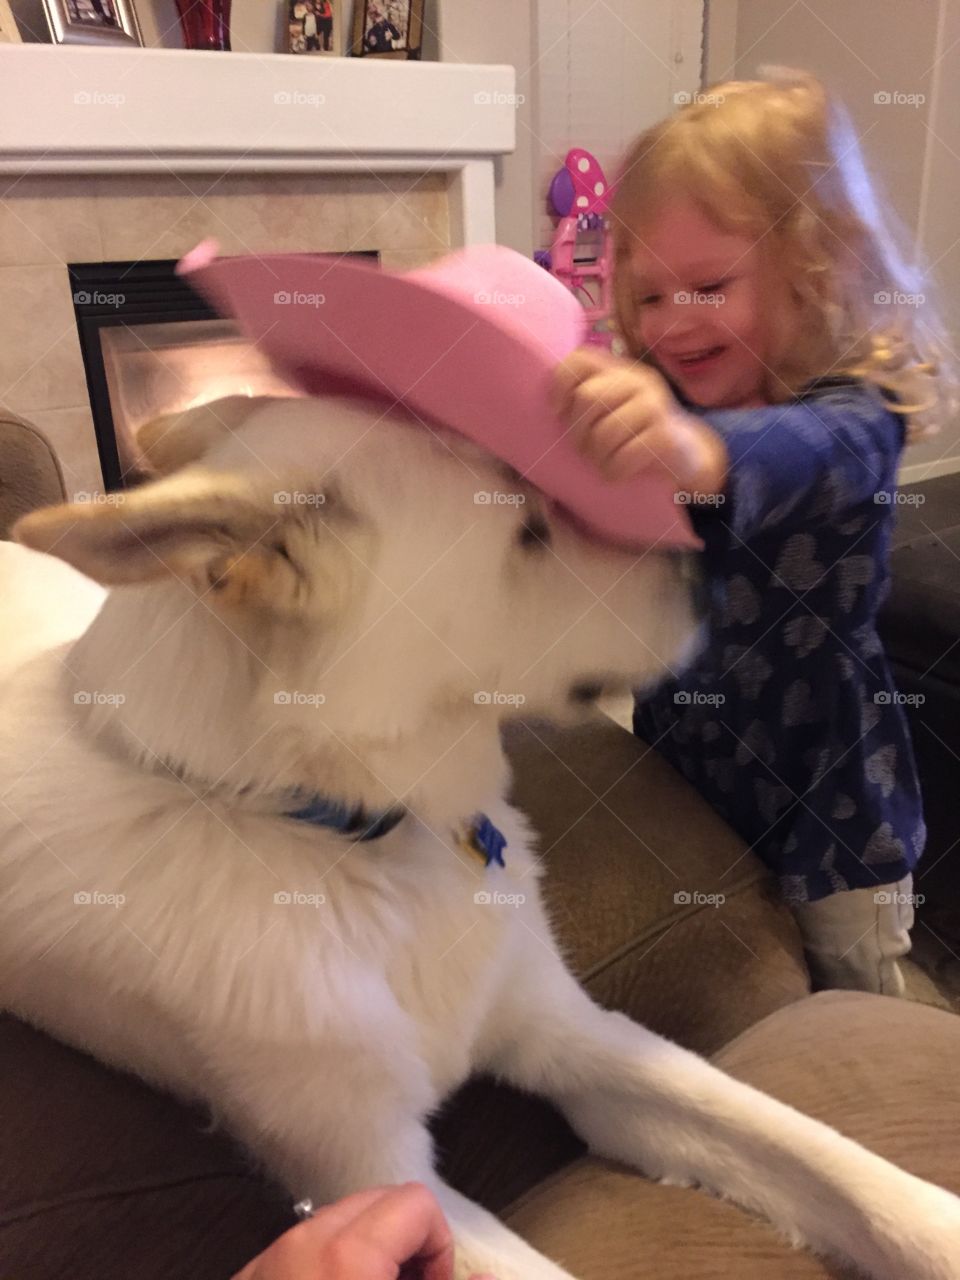 Dog hates being forced to wear pink cowgirl hat 